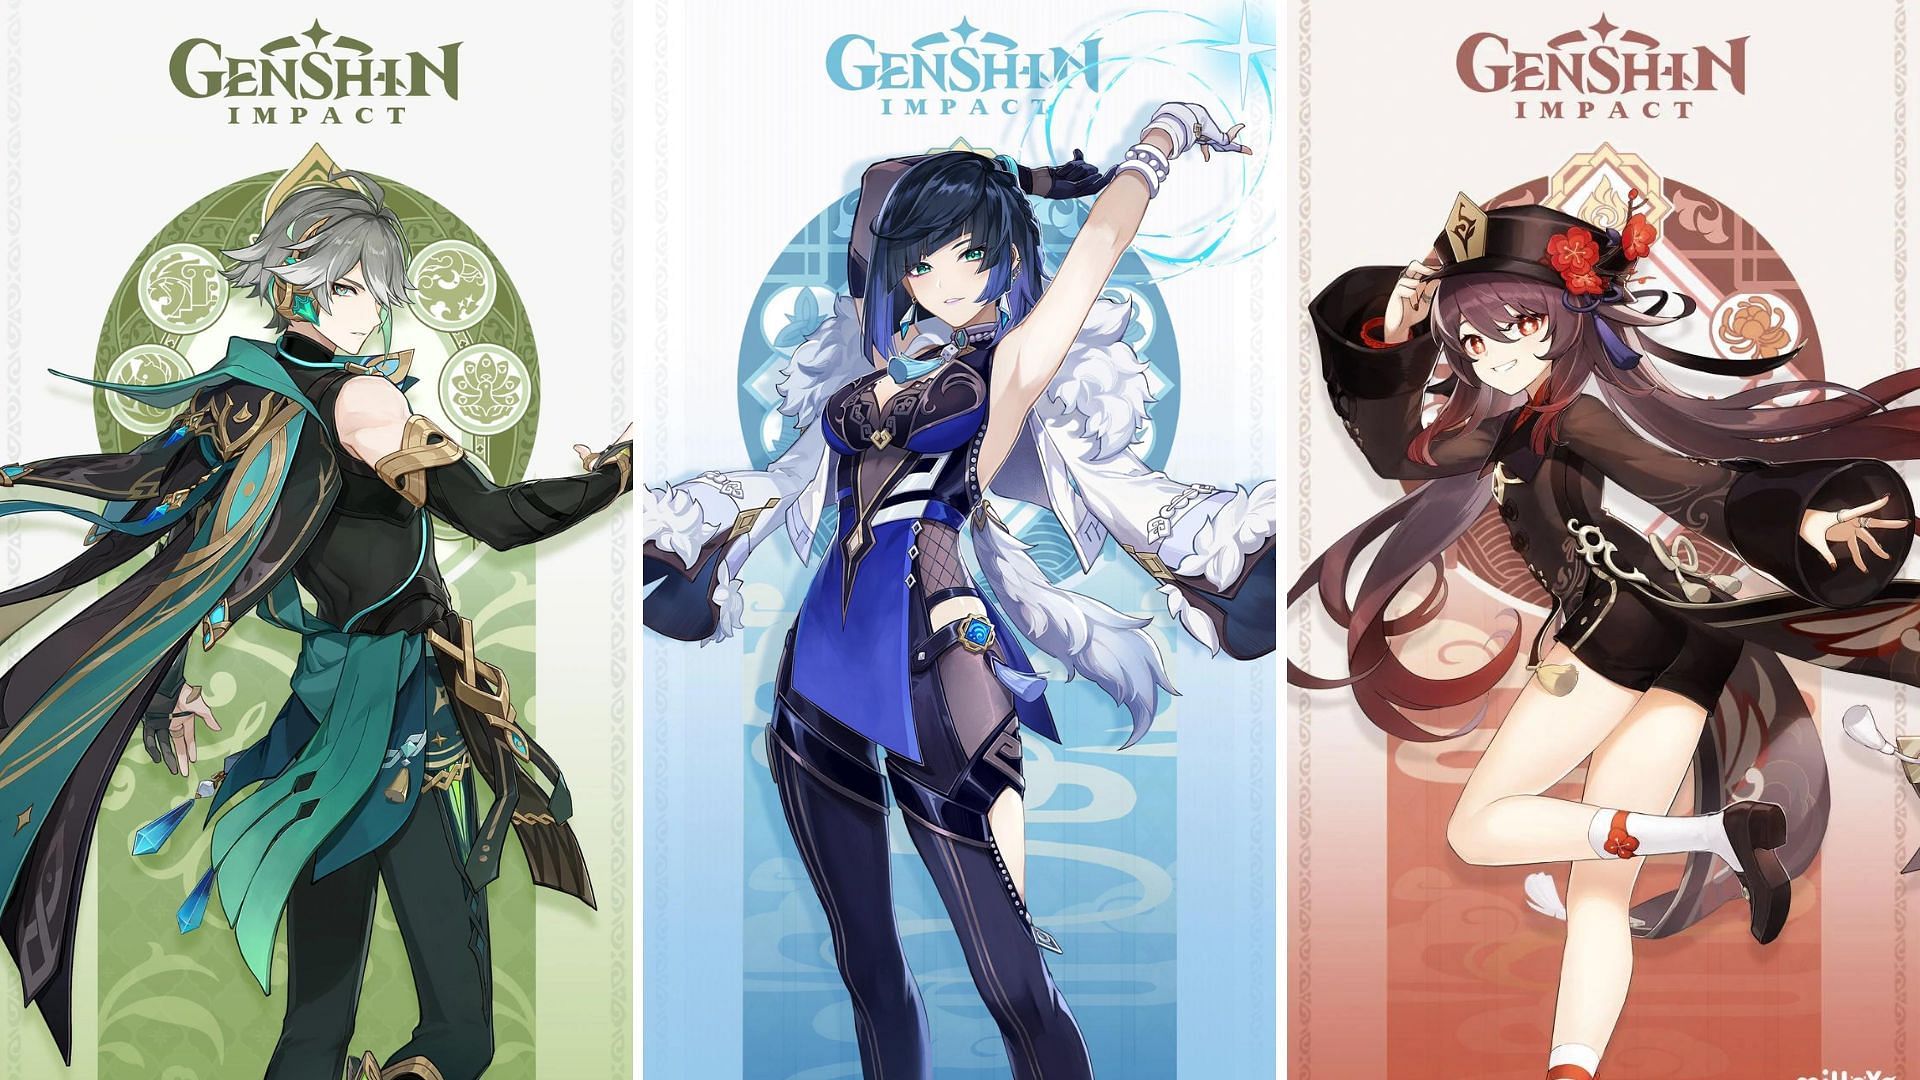 Genshin Impact 3.4: Wish for Alhaitham or Xiao, or save for Hu Tao and Yelan ?